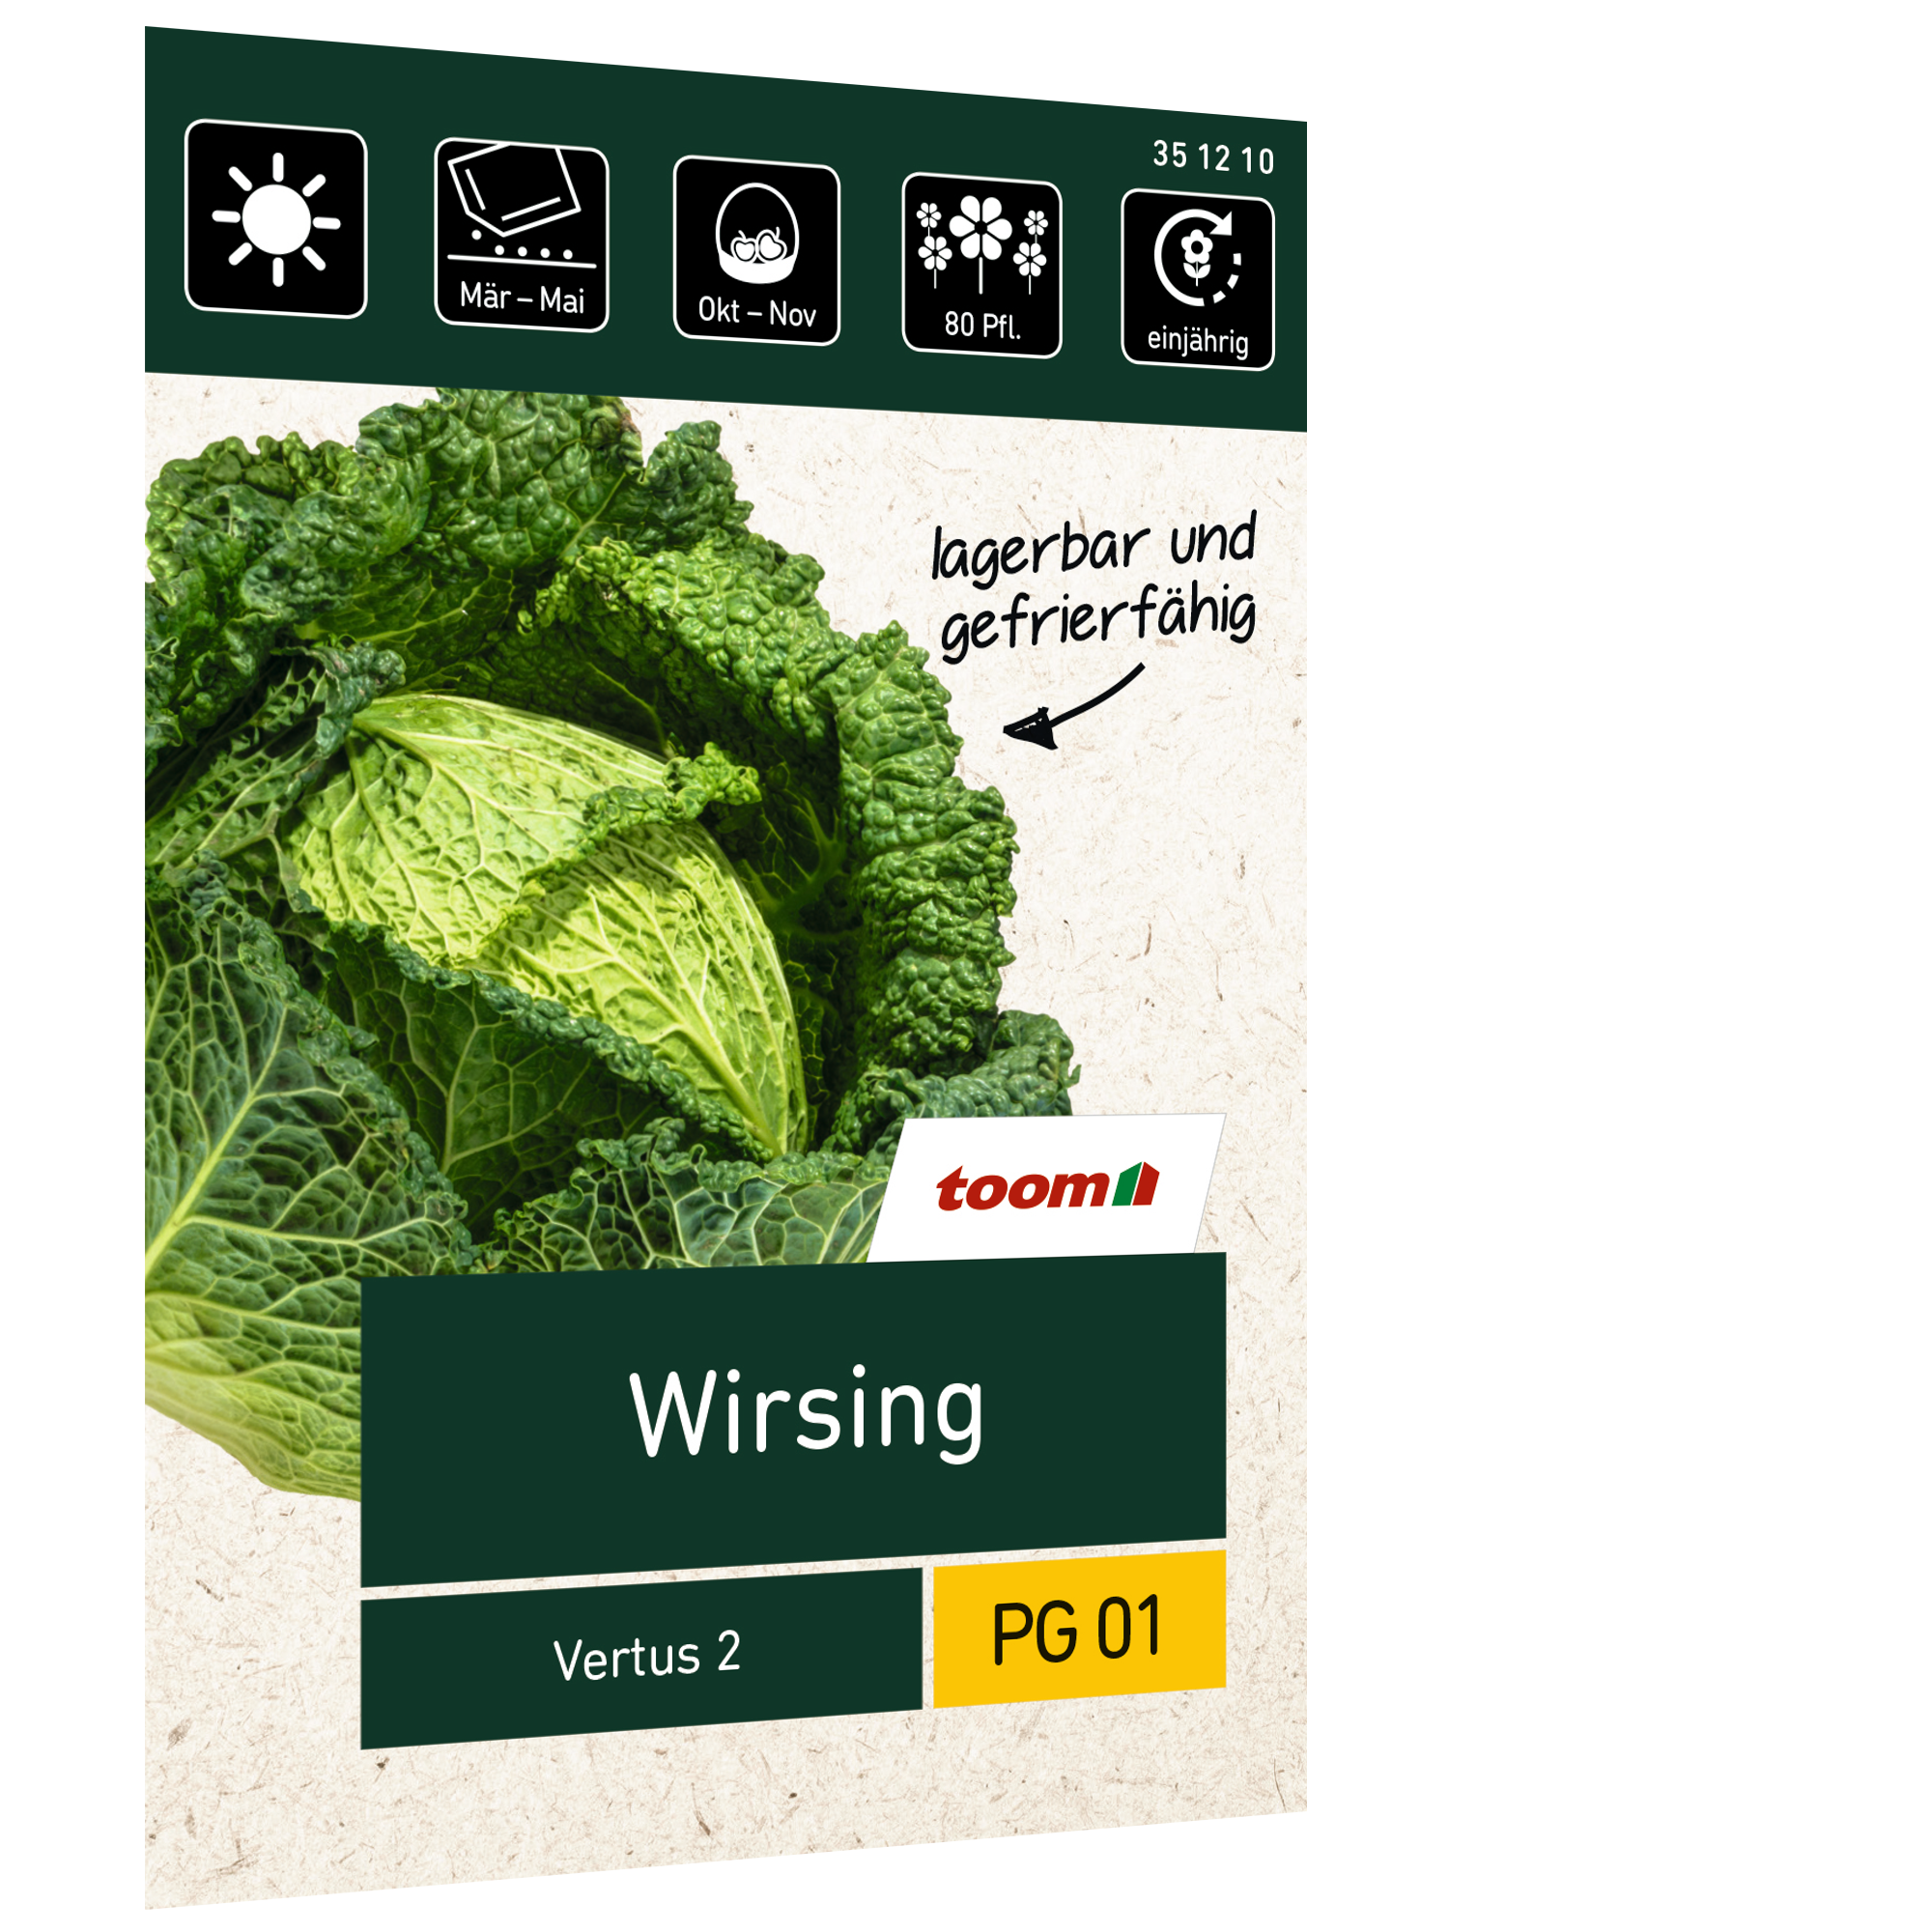 Wirsing 'Vertus 2' + product picture